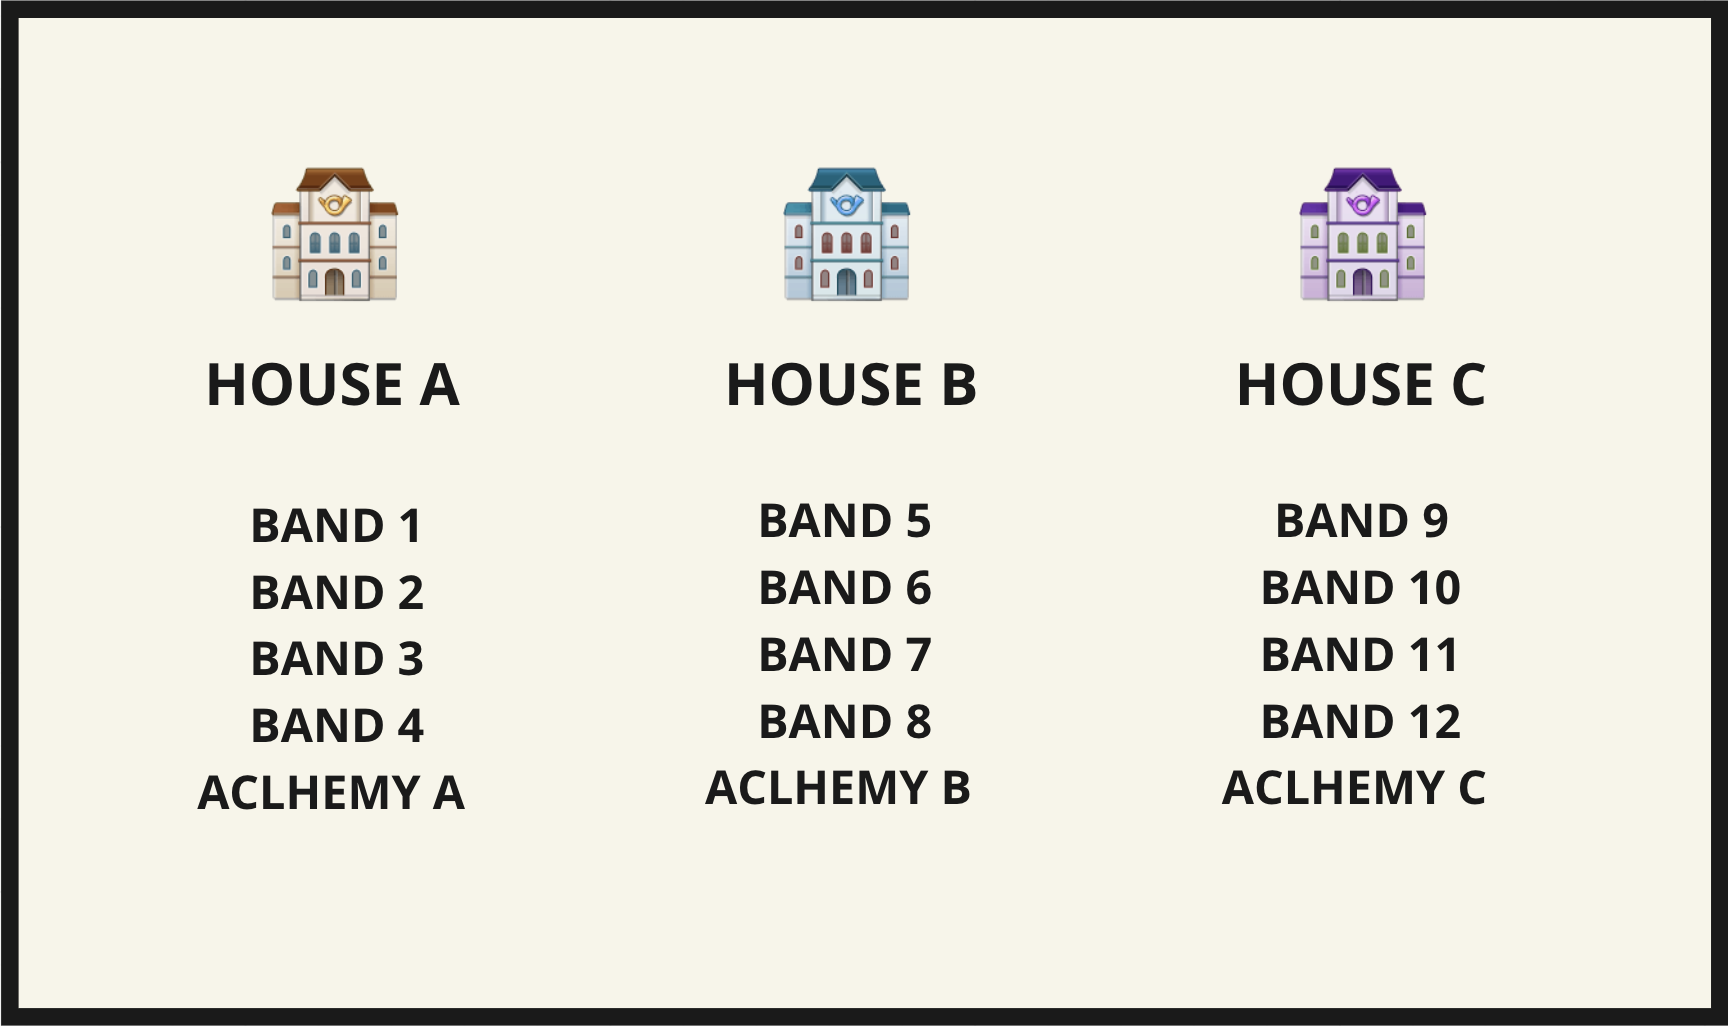 3 Houses, each with 4 Bands + 1 Alchemy Team.